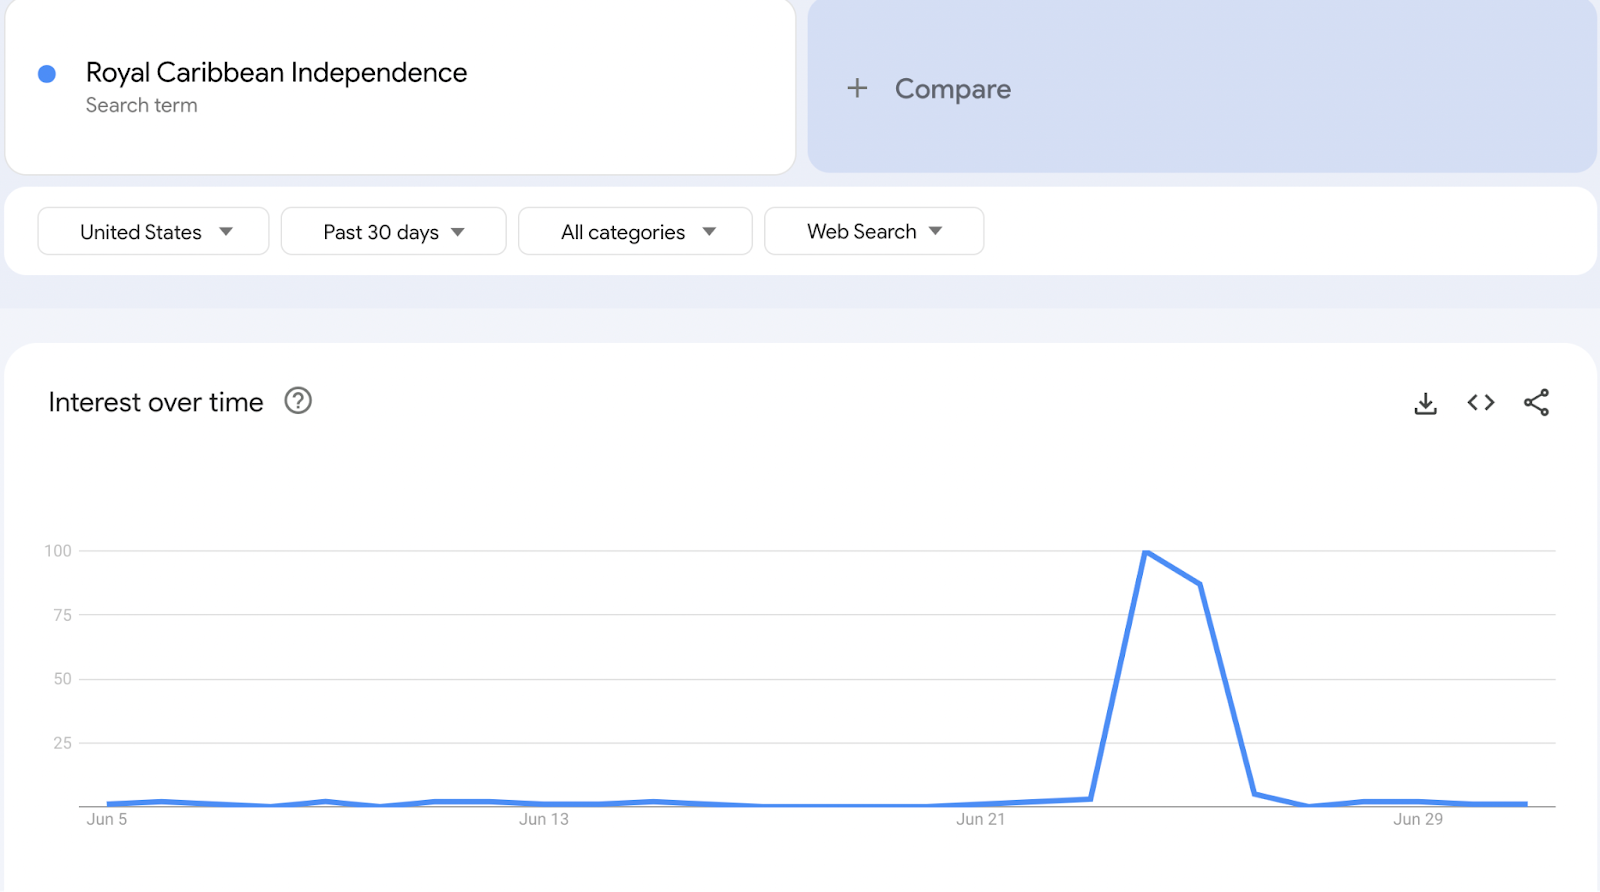 a spike in searches for "Royal Caribbean Independence"